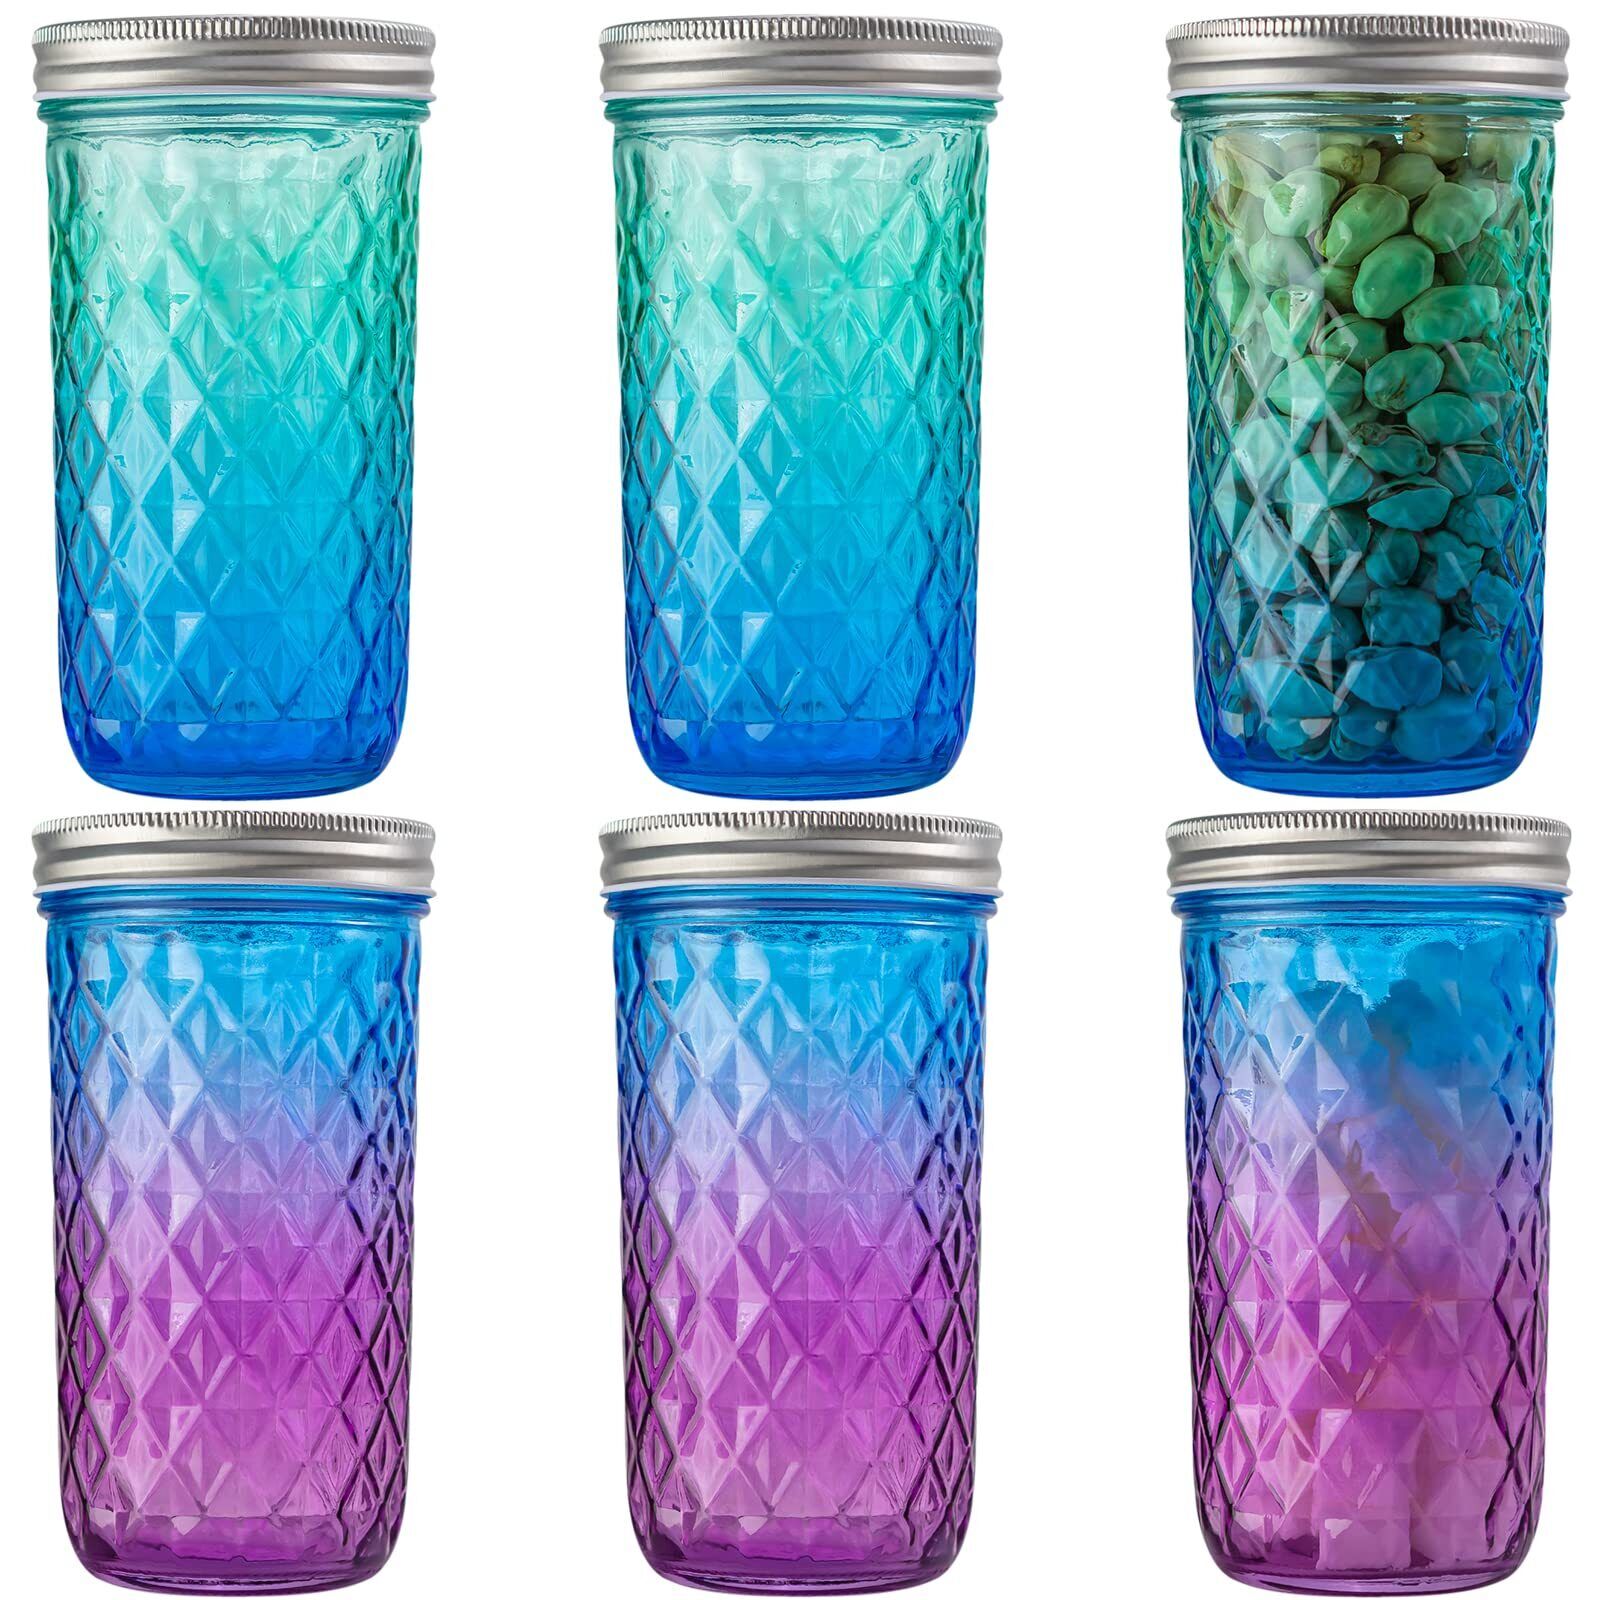 6 Pack Colored Mason Jars, 20 oz Glass Canning Jars with Airtight Lids, Glass...